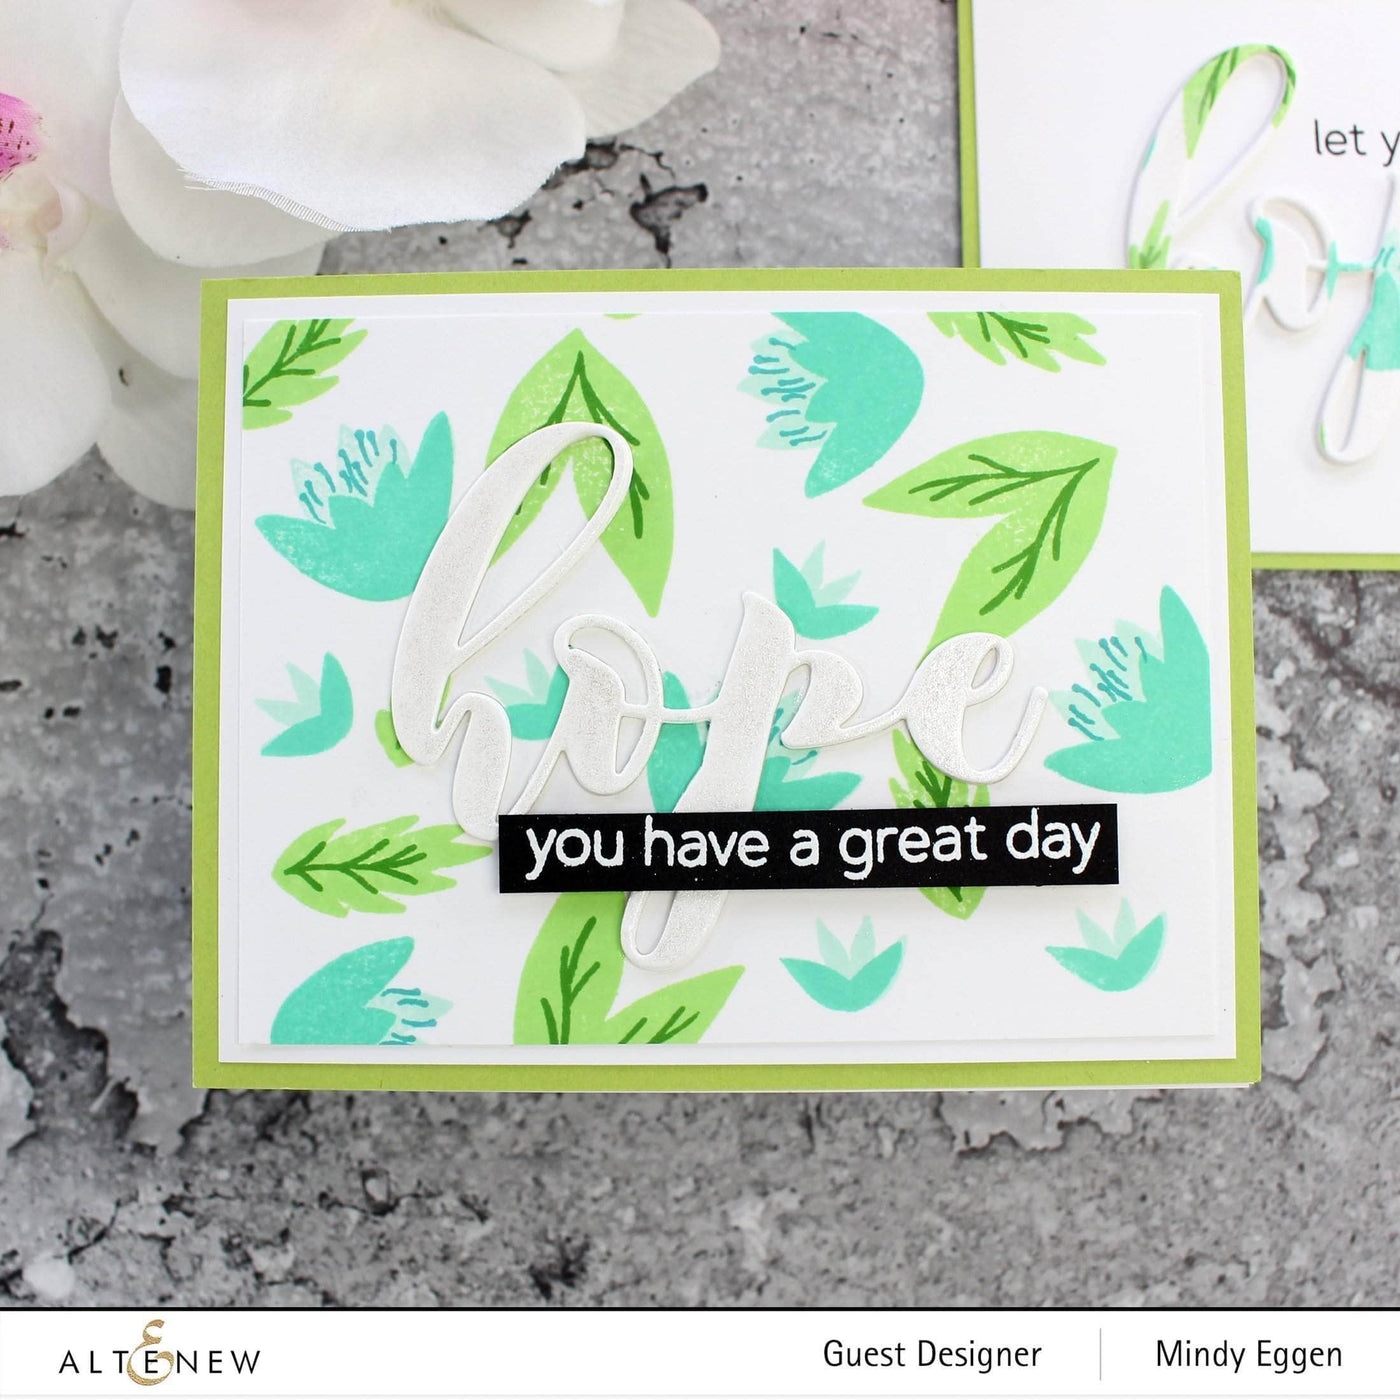 Photocentric Clear Stamps Mega Greetings 4 Stamp Set